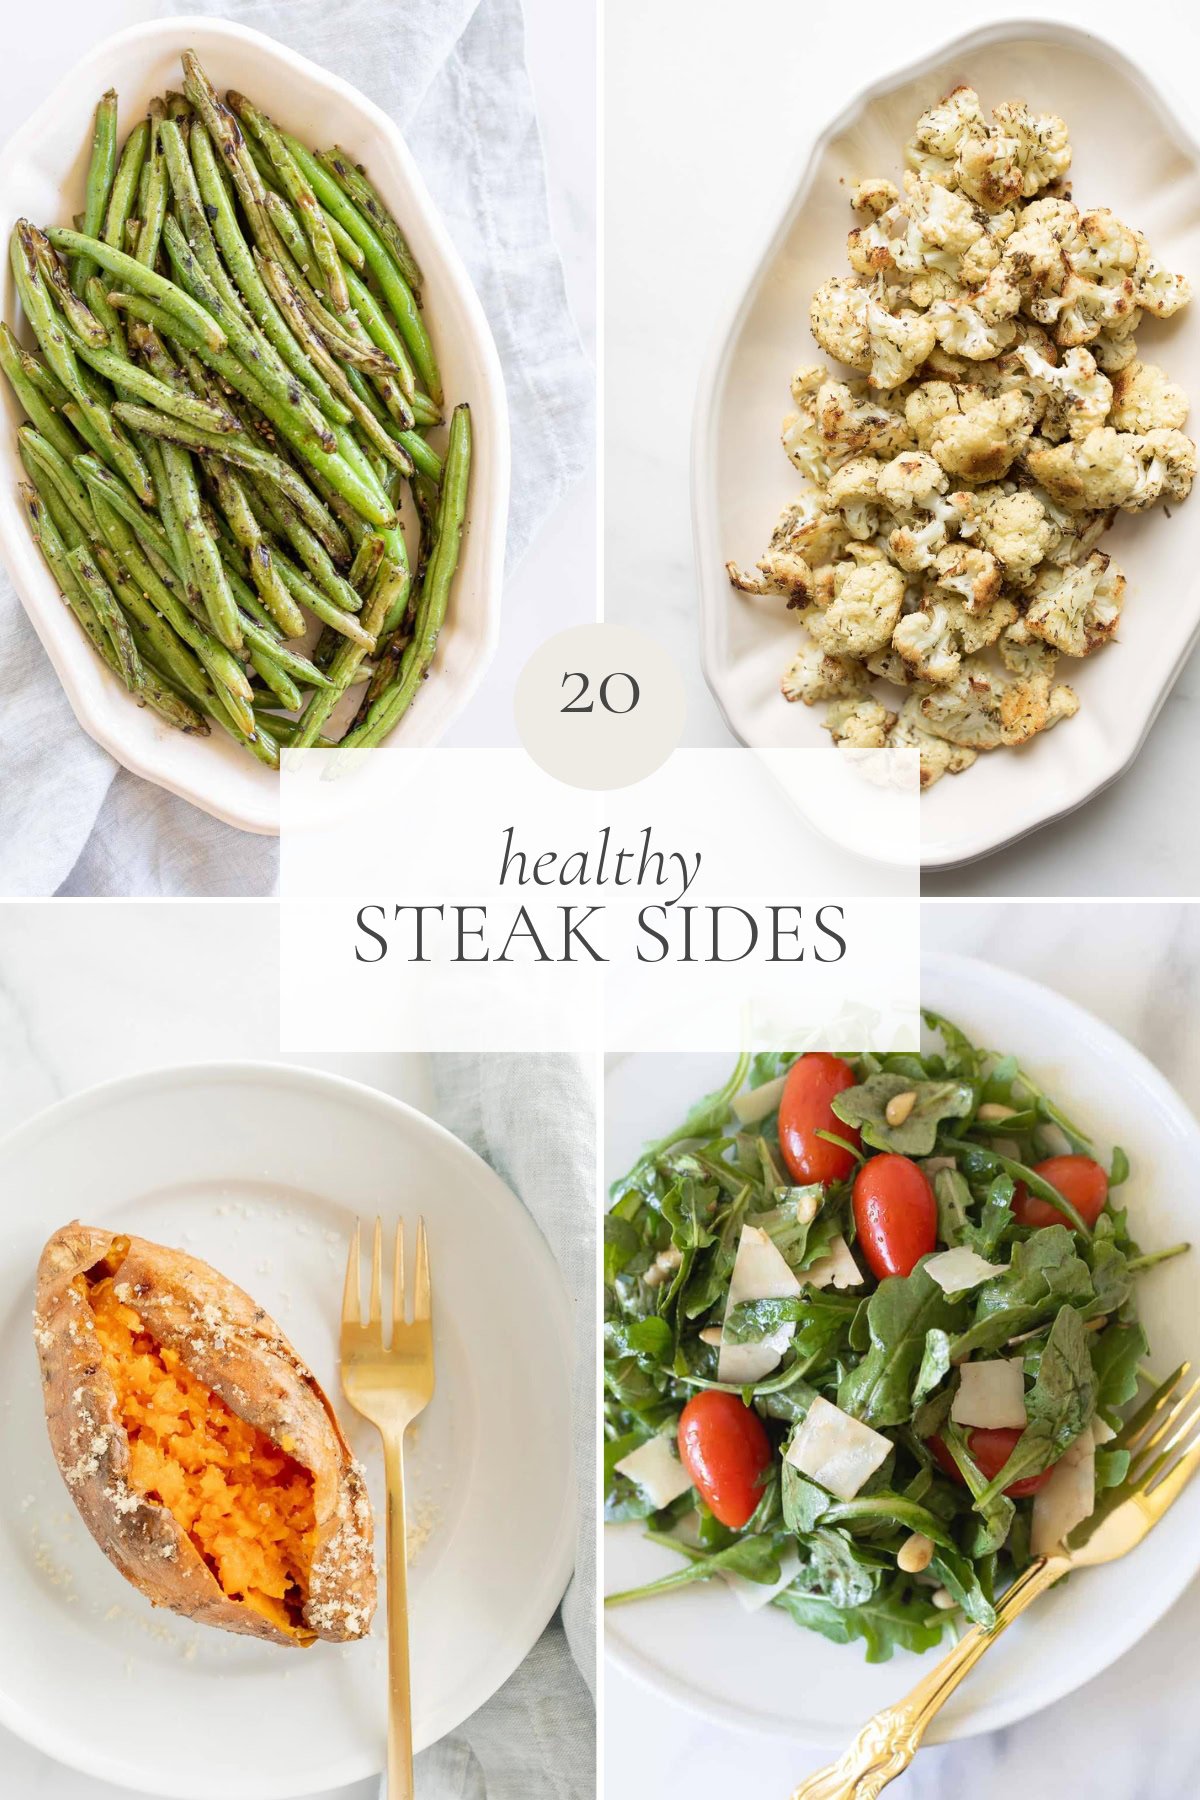 A vibrant collage showcases healthy steak sides: grilled green beans, roasted cauliflower, baked sweet potato, and a mixed green salad with cherry tomatoes. Text overlay reads "20 Healthy Steak Sides.